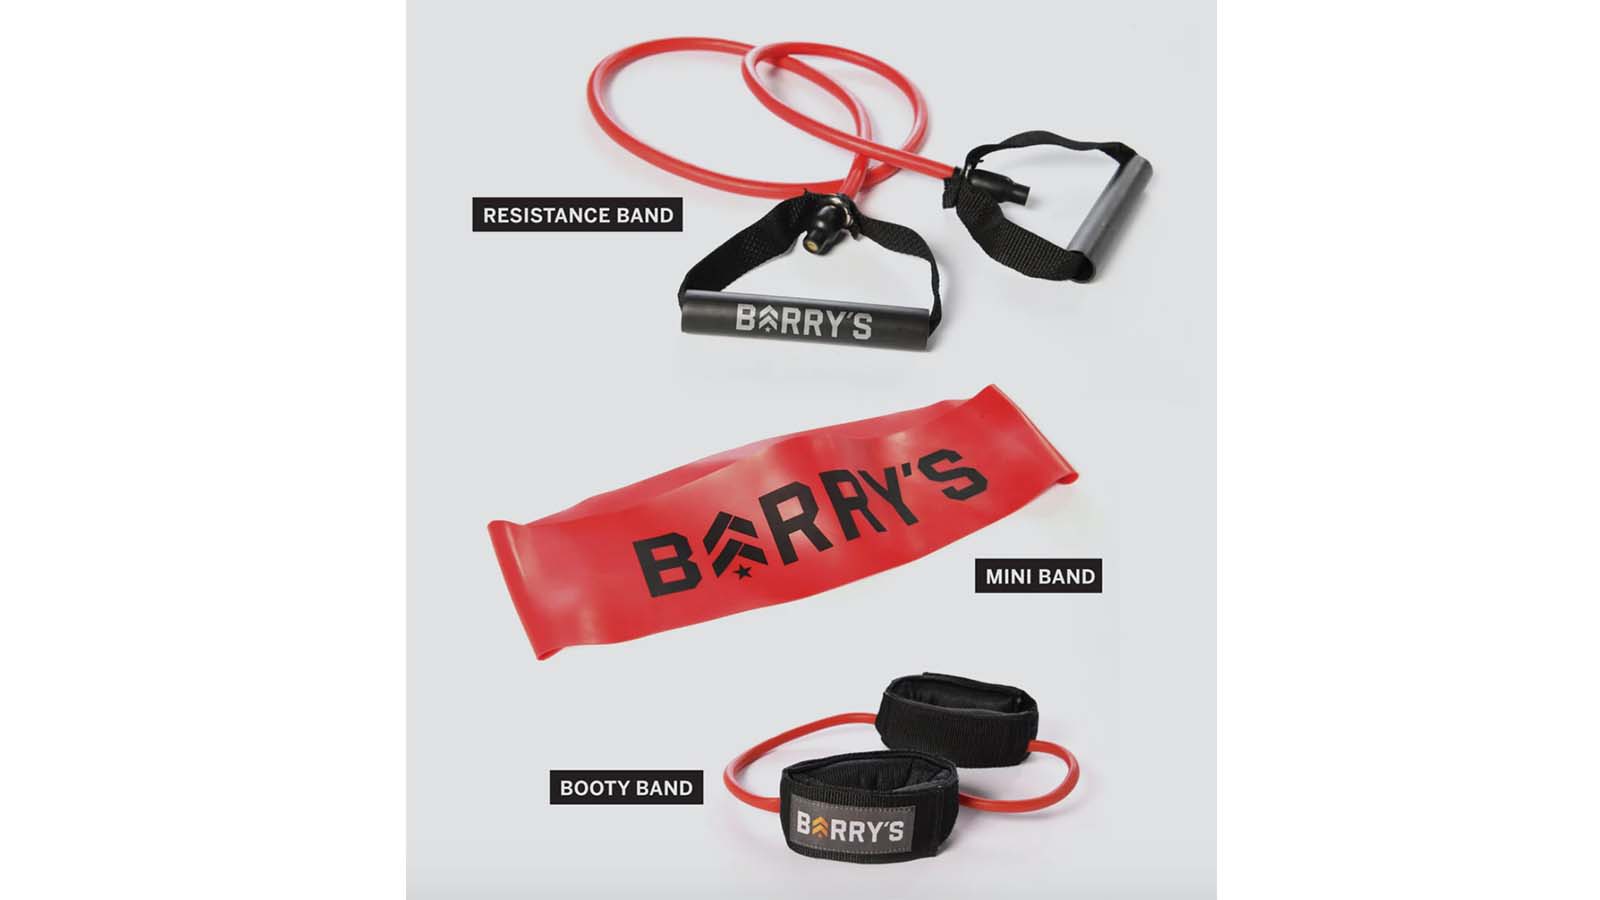 Barry's Bootcamp Hollywood secret weapon workout system new in box